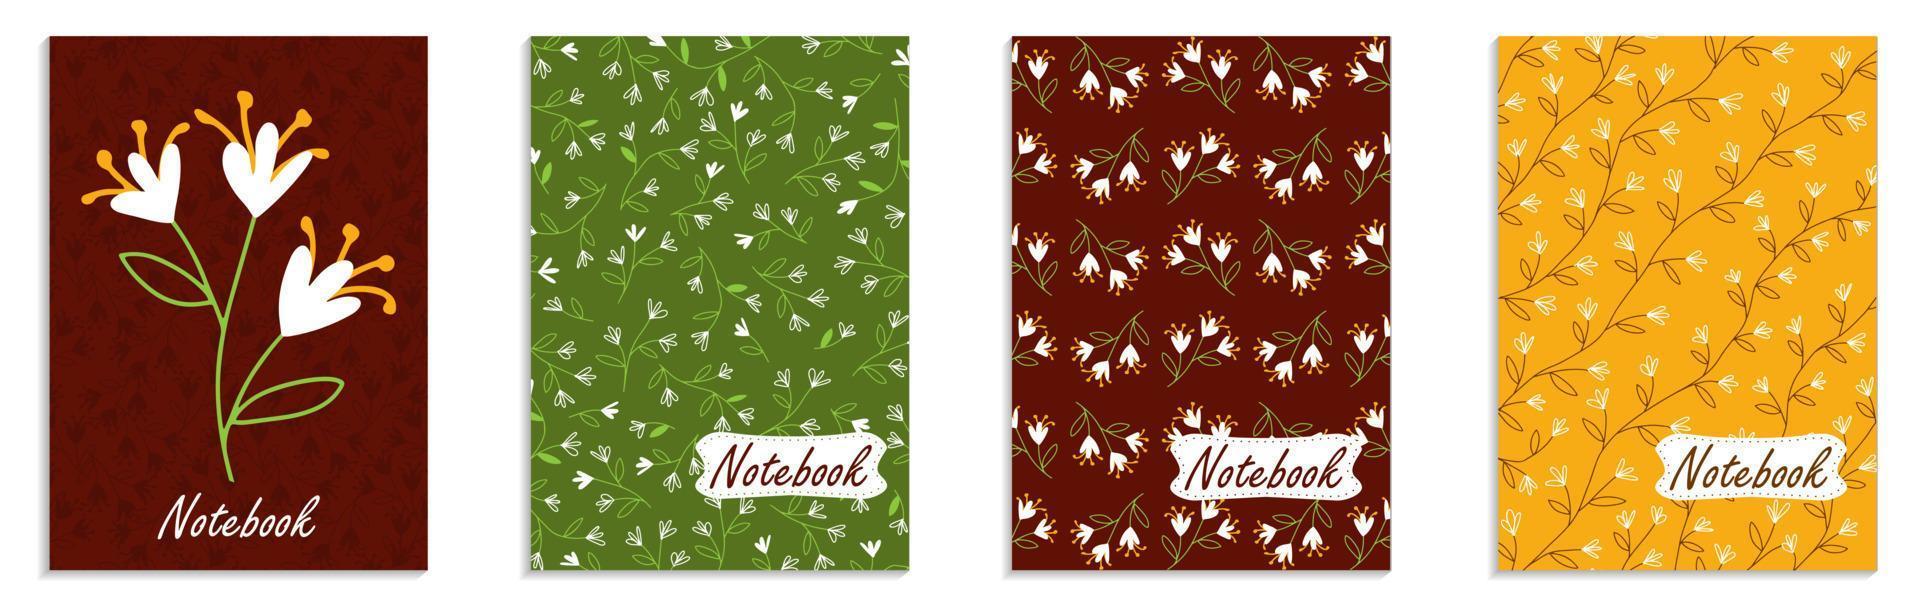 Notebook. Cover design for planner, diary, recipe book. Hand drawn floral pattern. Vector illustration.